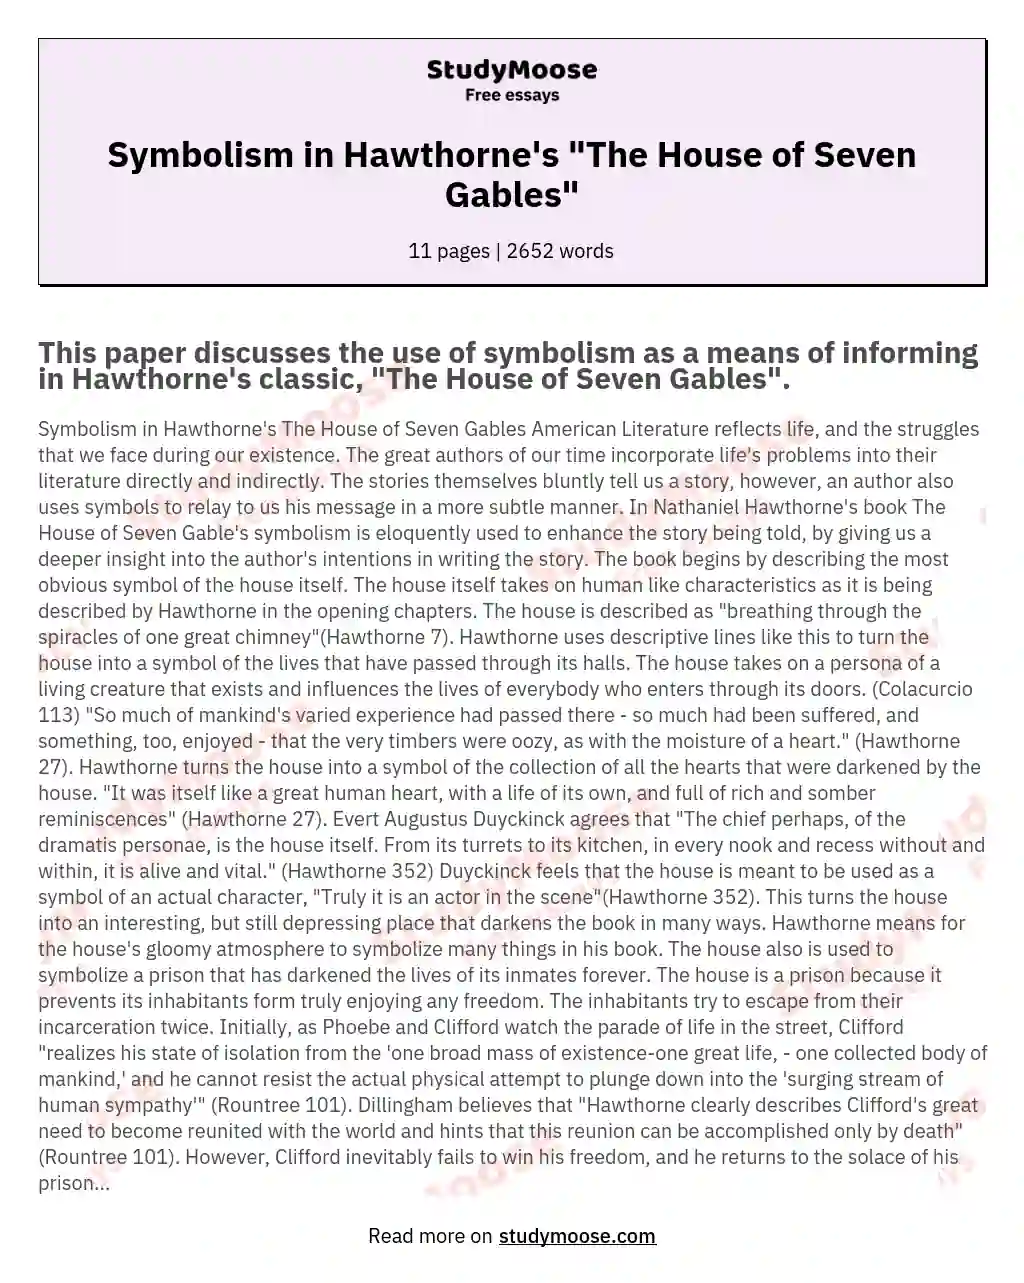 Symbolism in Hawthorne's "The House of Seven Gables" essay